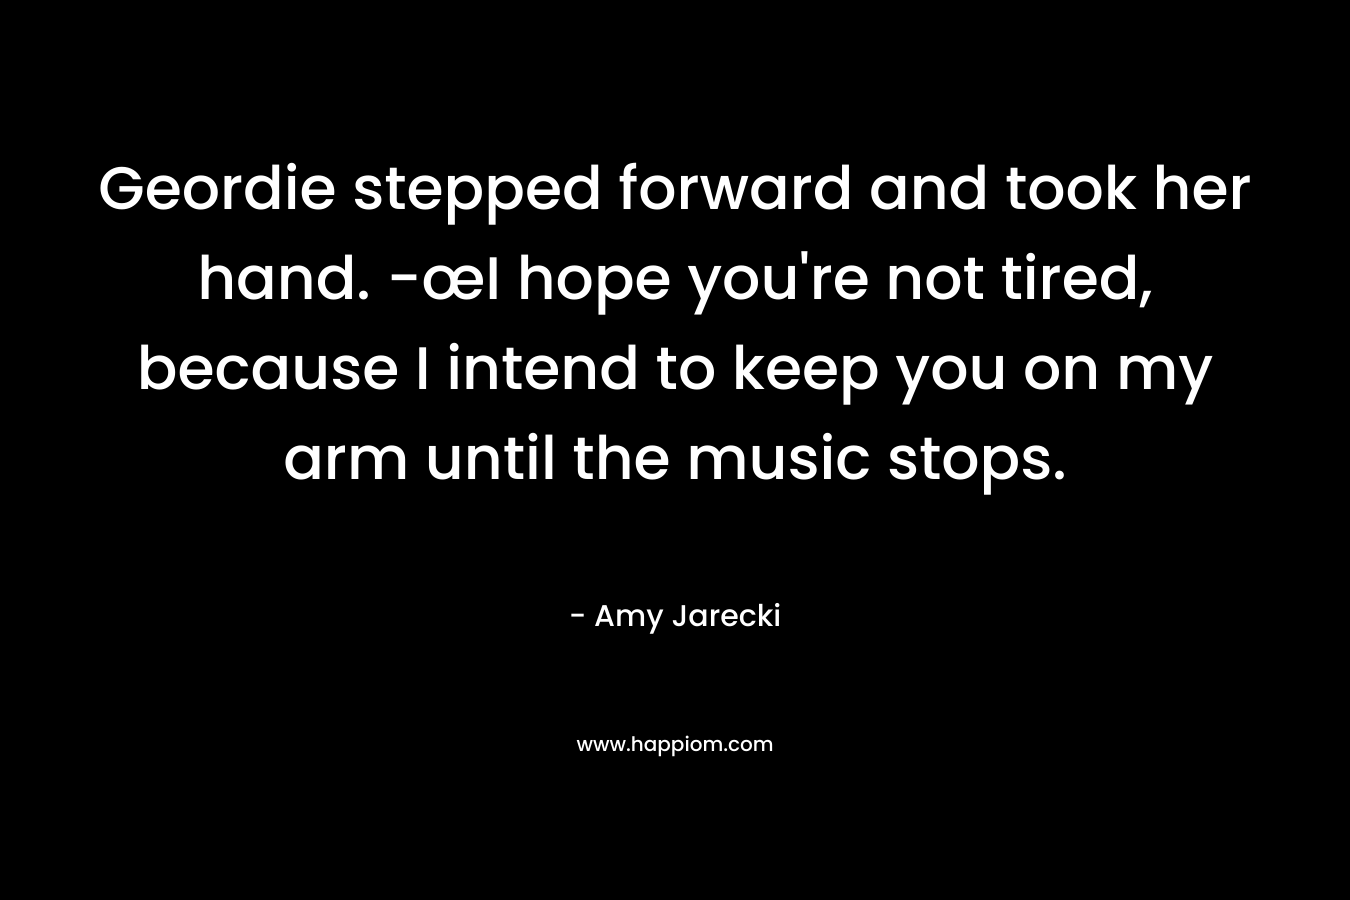 Geordie stepped forward and took her hand. -œI hope you're not tired, because I intend to keep you on my arm until the music stops.